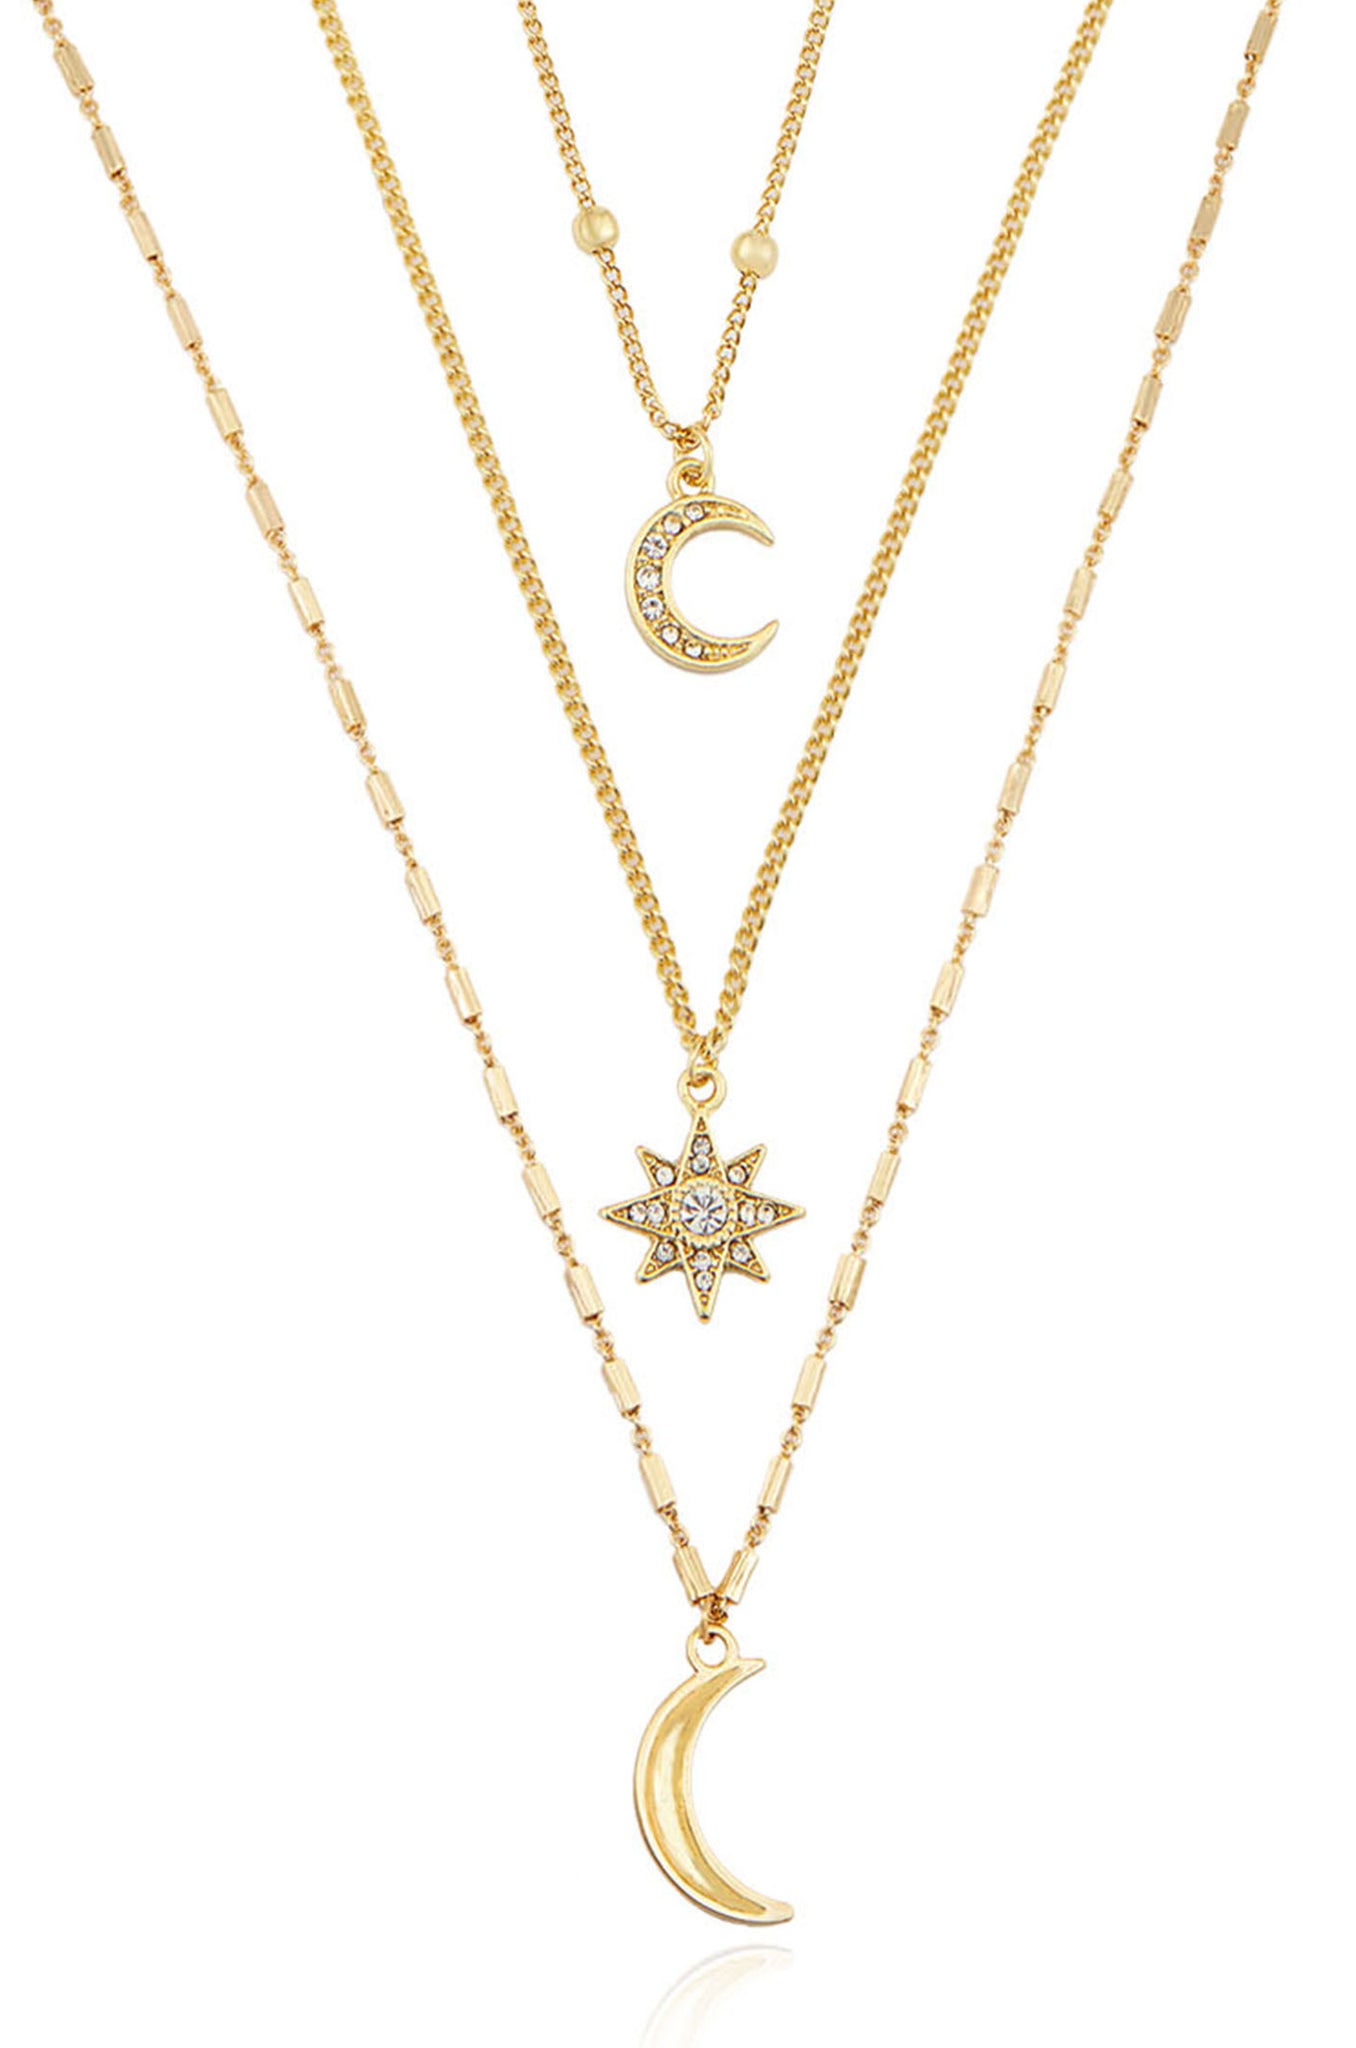 Night Sky Necklace Set in gold